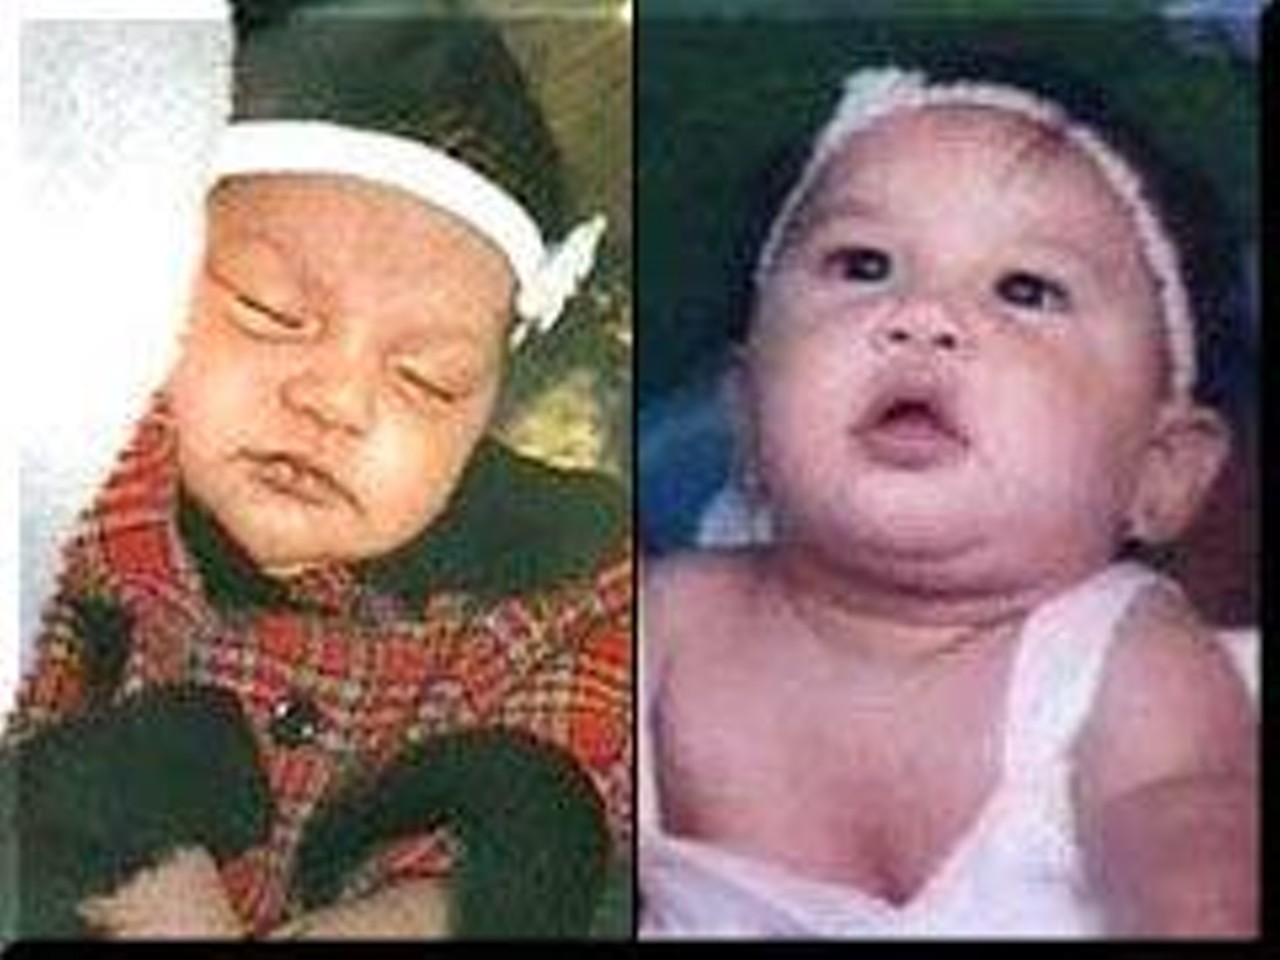 The Murders and Disposal of Sariyah Garcia and Sebastian Lopez
While all account of child abuse stay with us, the heartbreaking deaths of 14-month-old Sariyah Garcia and 4-month-old Sebastian Lopez sting a little bit differently. In 2007, a woman named Valerie Lopez and her boyfriend Jerry Salazar killed Valerie’s two children (Lopez reportedly suffocated Sebastian and beating Sariyah), wrapped their bodies in trash bags and hid them beneath her wood-frame house. Immediately after the news broke, the home became a memorial for the babies, as well as a place for angered residents to leave messages like, “Burn in hell Valerie and Jerry.” Both avoided the death sentence and were instead given life in prison without parole.
Photo via Facebook / In loving Memory of Sariyah Garcia and Sebastian Lopez